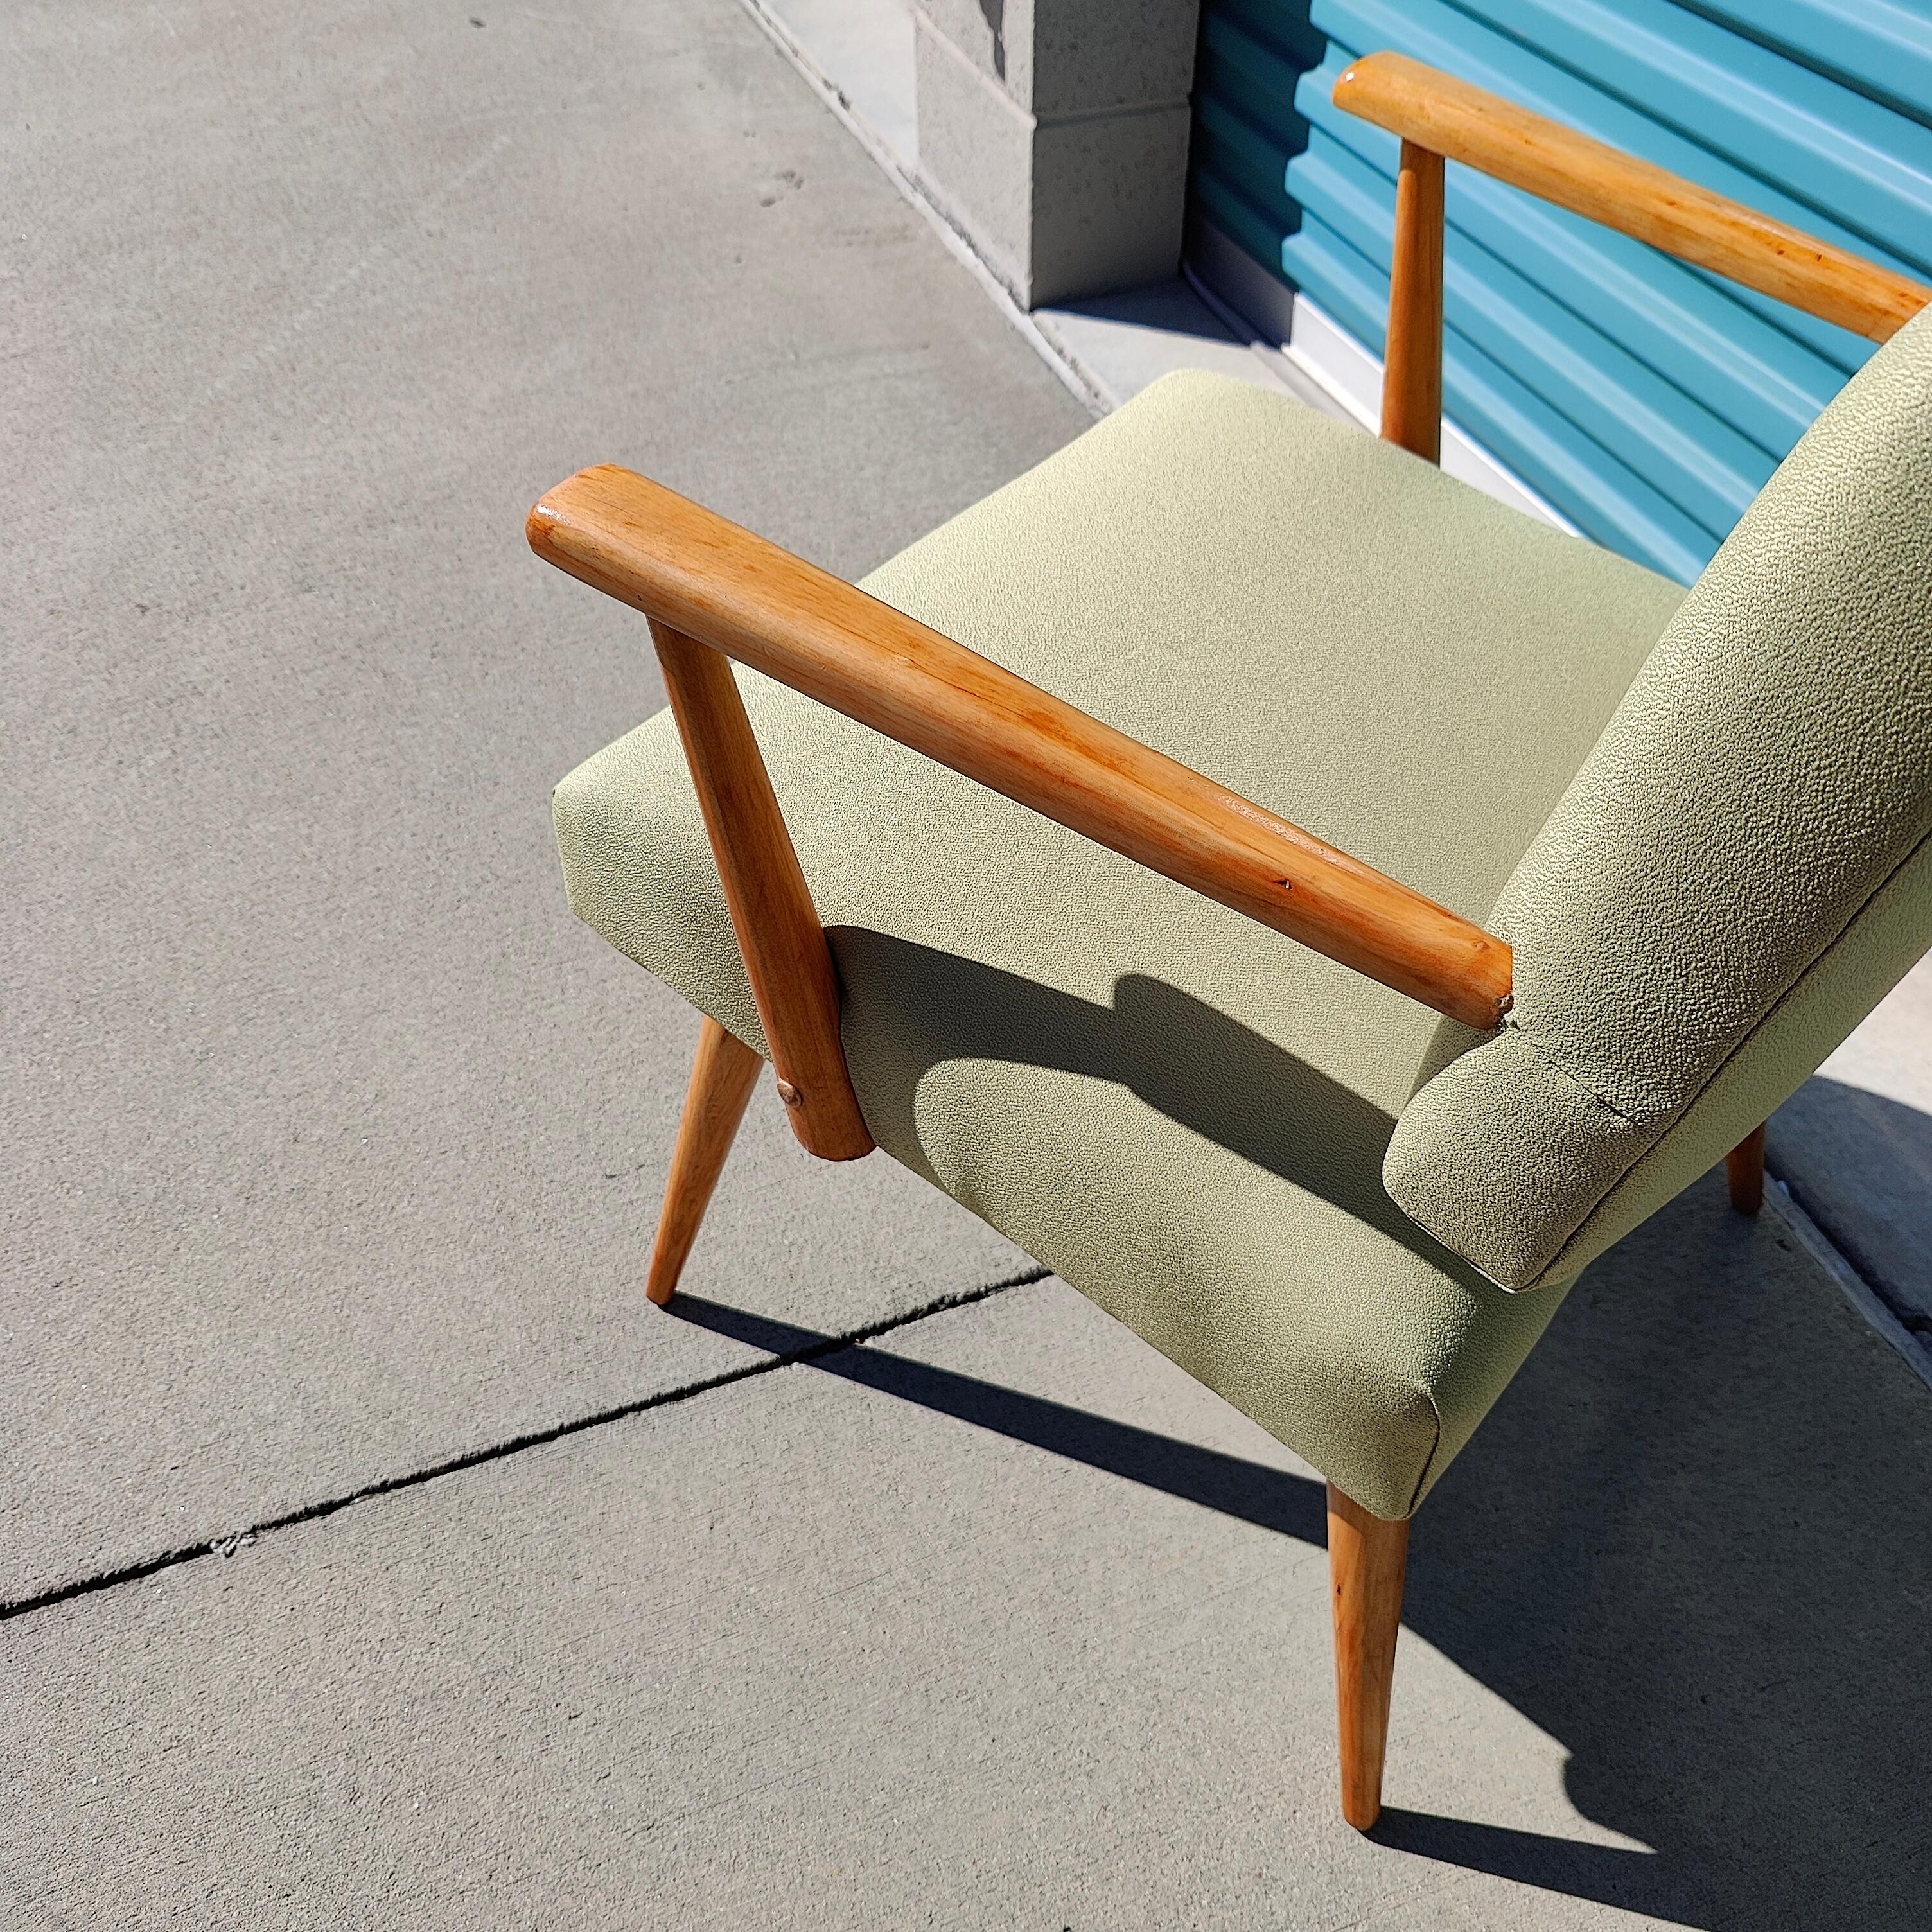 As dainty as they come, now available is a reupholstered lounge chair c1960s. Unknown manufacturer but resembles chairs in the manner of Jens Risom. Features an apple green finish with refinished wood

Measures approximately 24w x 20d x 31.5t with